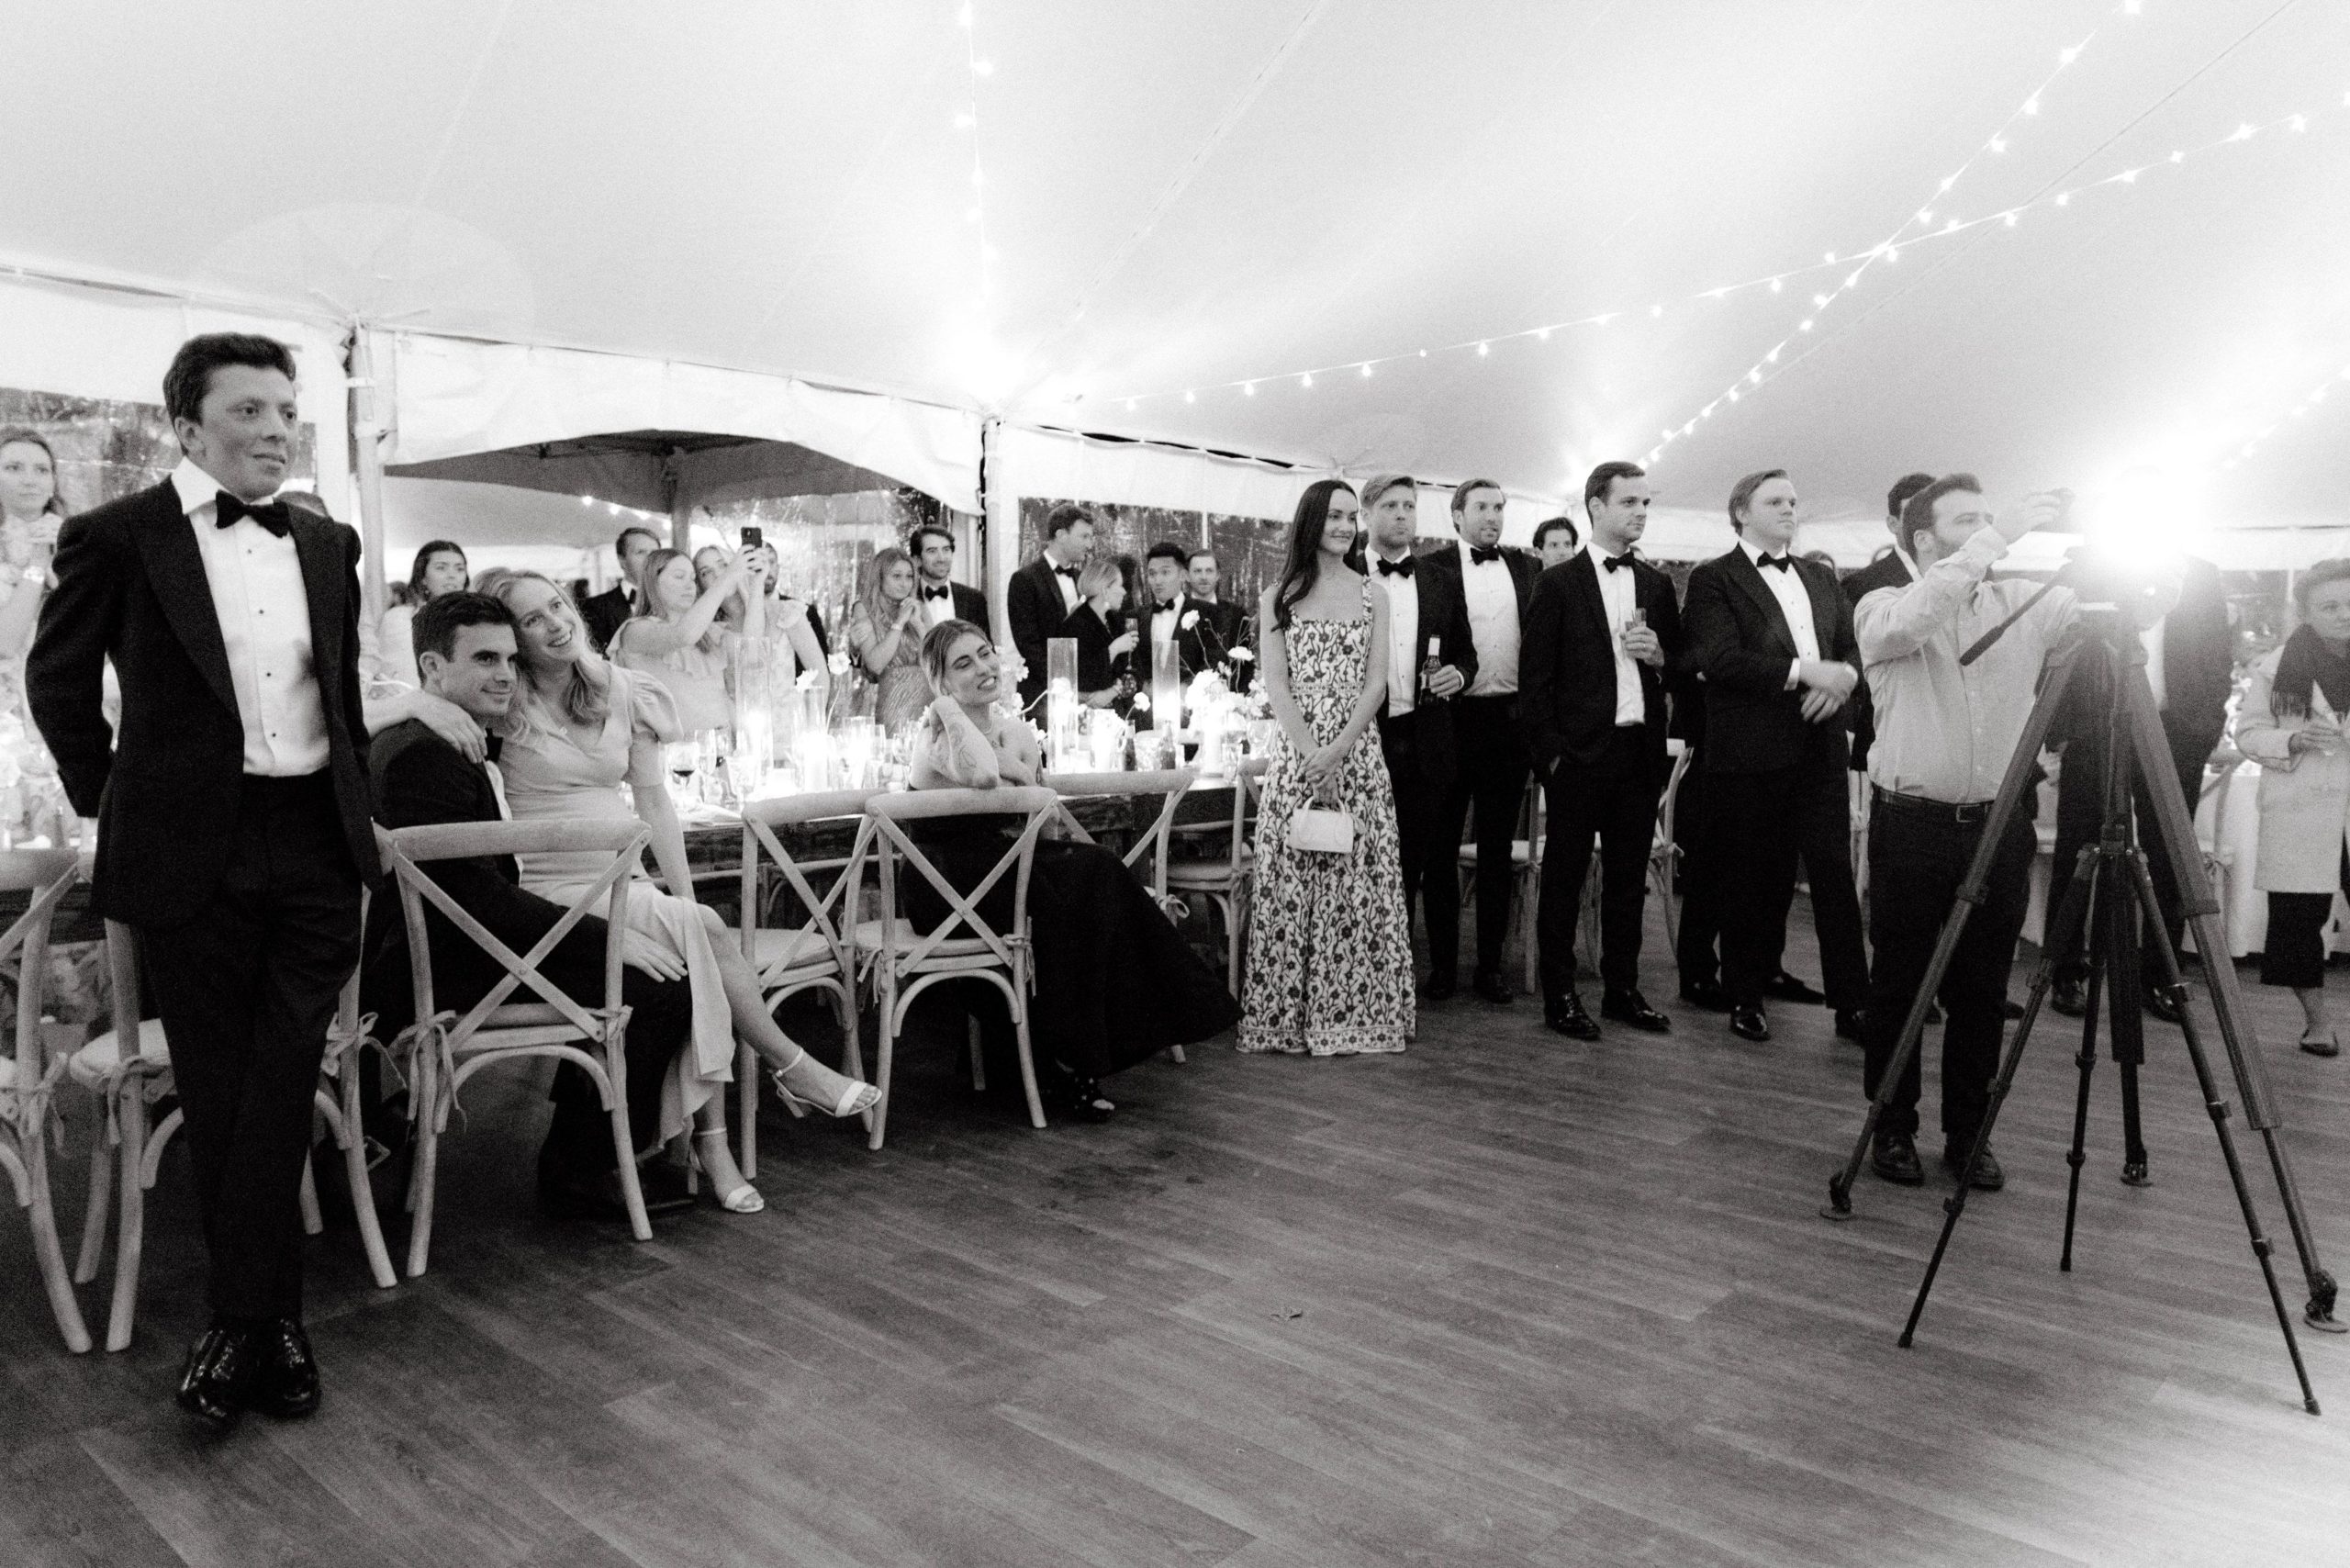 The wedding guests watch and the videographer shoots someone on the stage. Best NYC wedding vendors Image by Jenny Fu Studio.